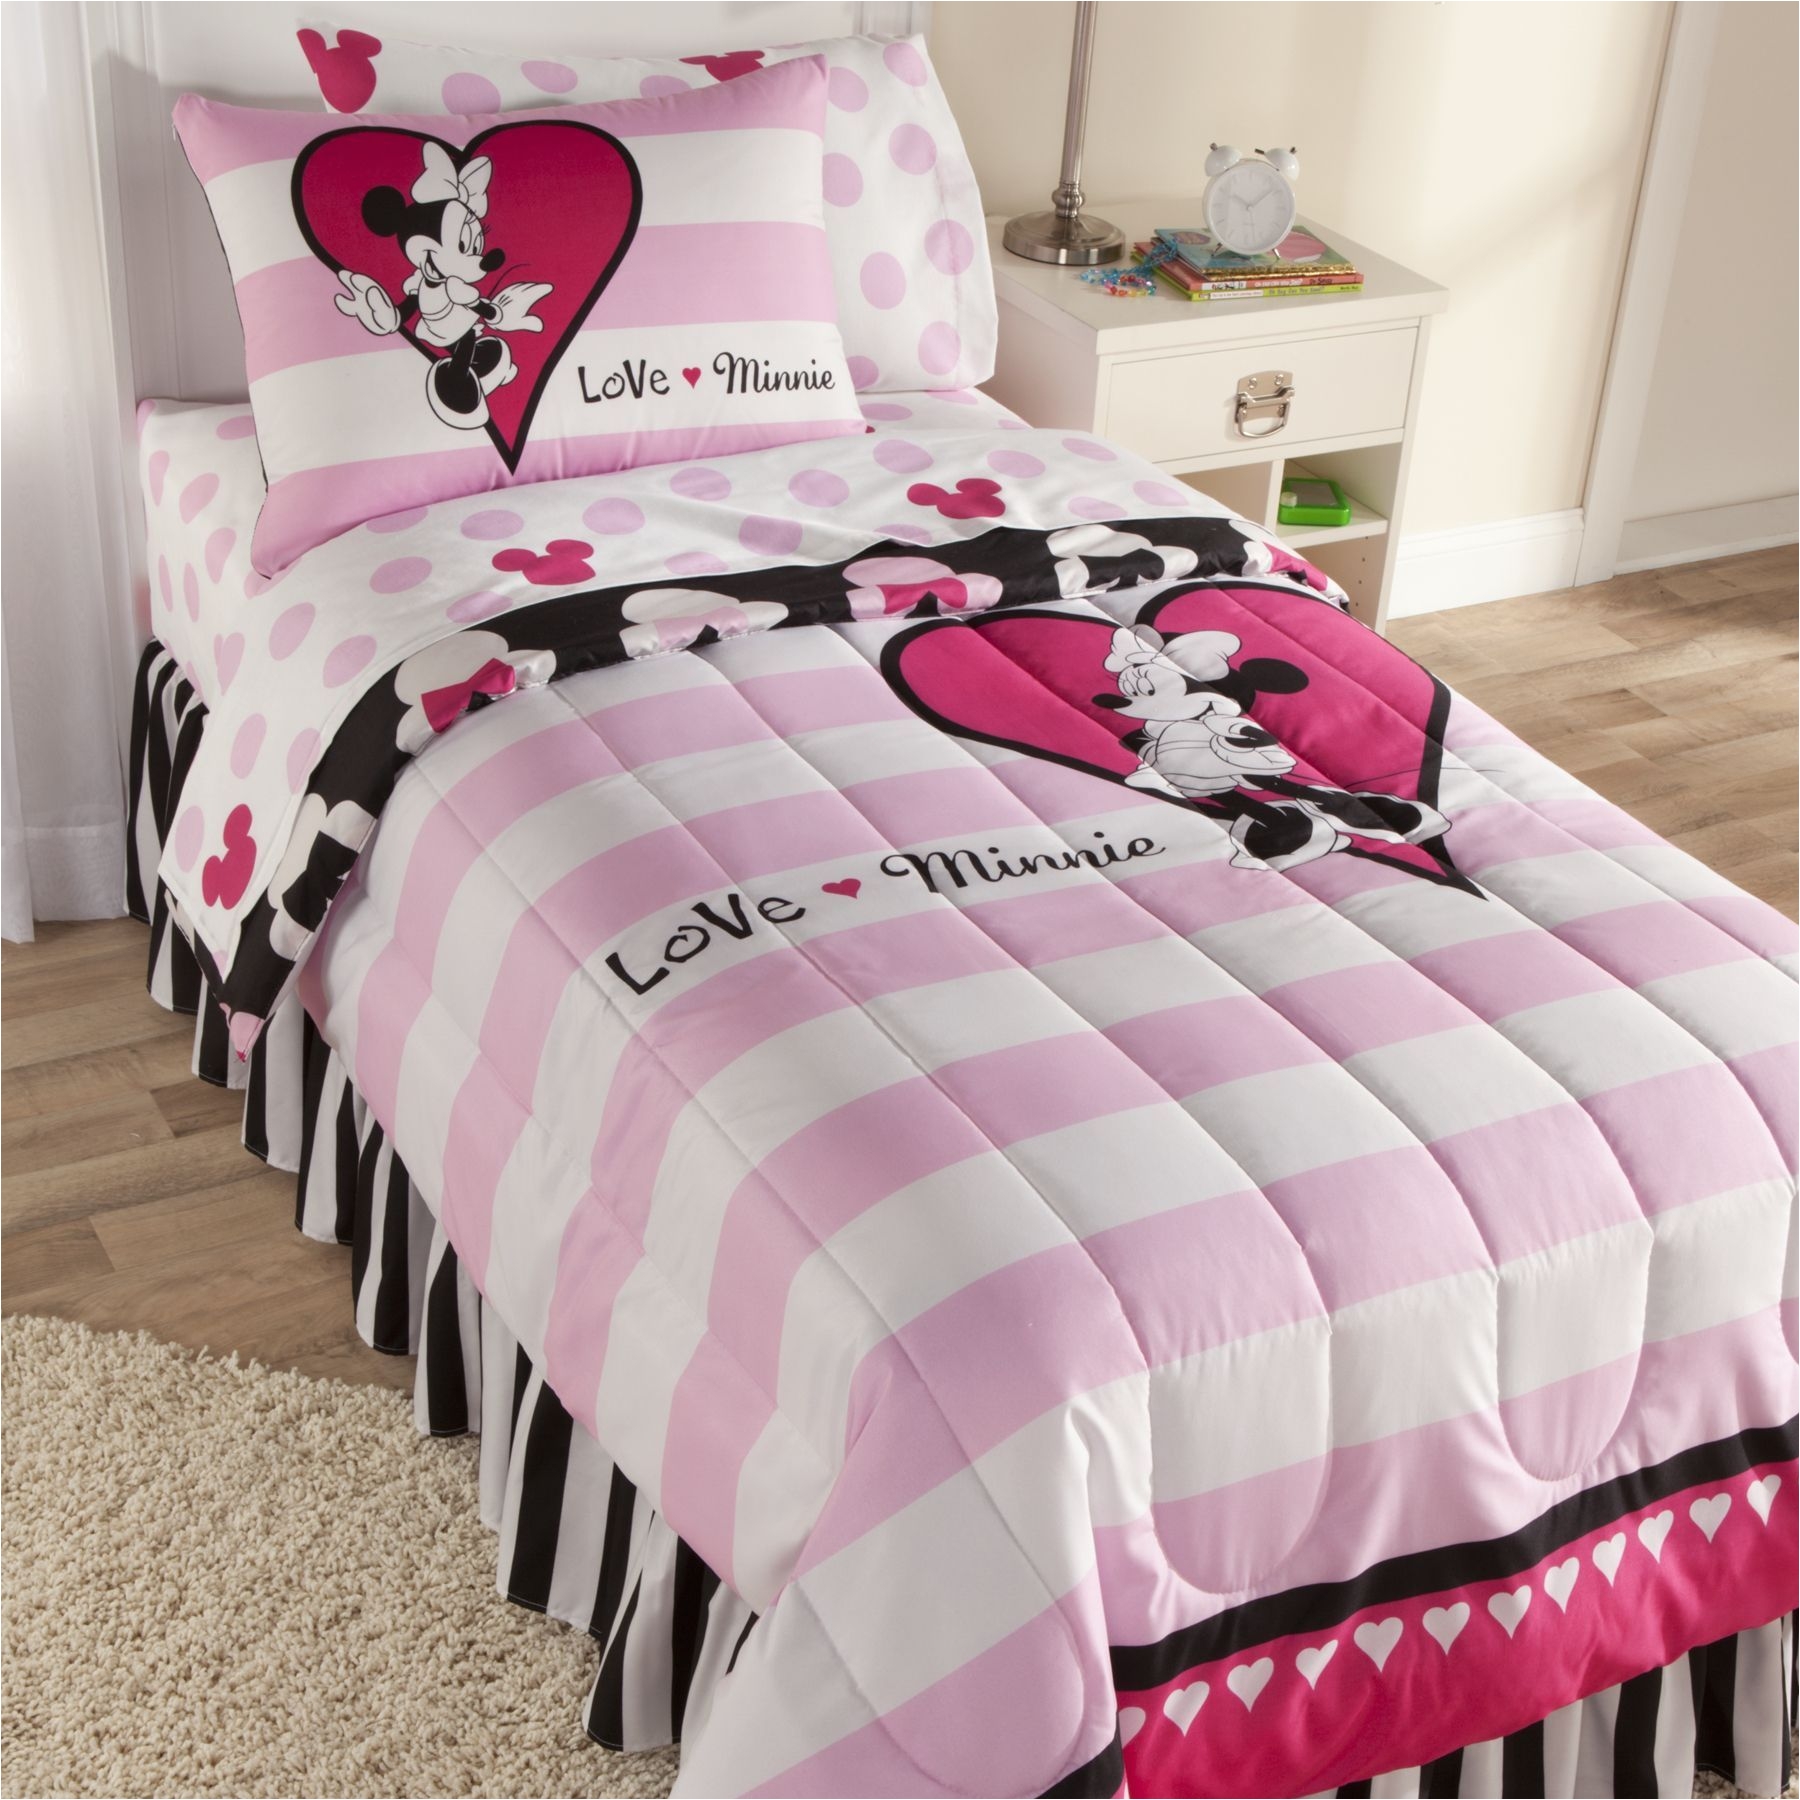 decor minnie mouse bedroom decor beds with underneath carpets and wooden floors also tables and cabinets with several books and an alarm clock minnie mouse